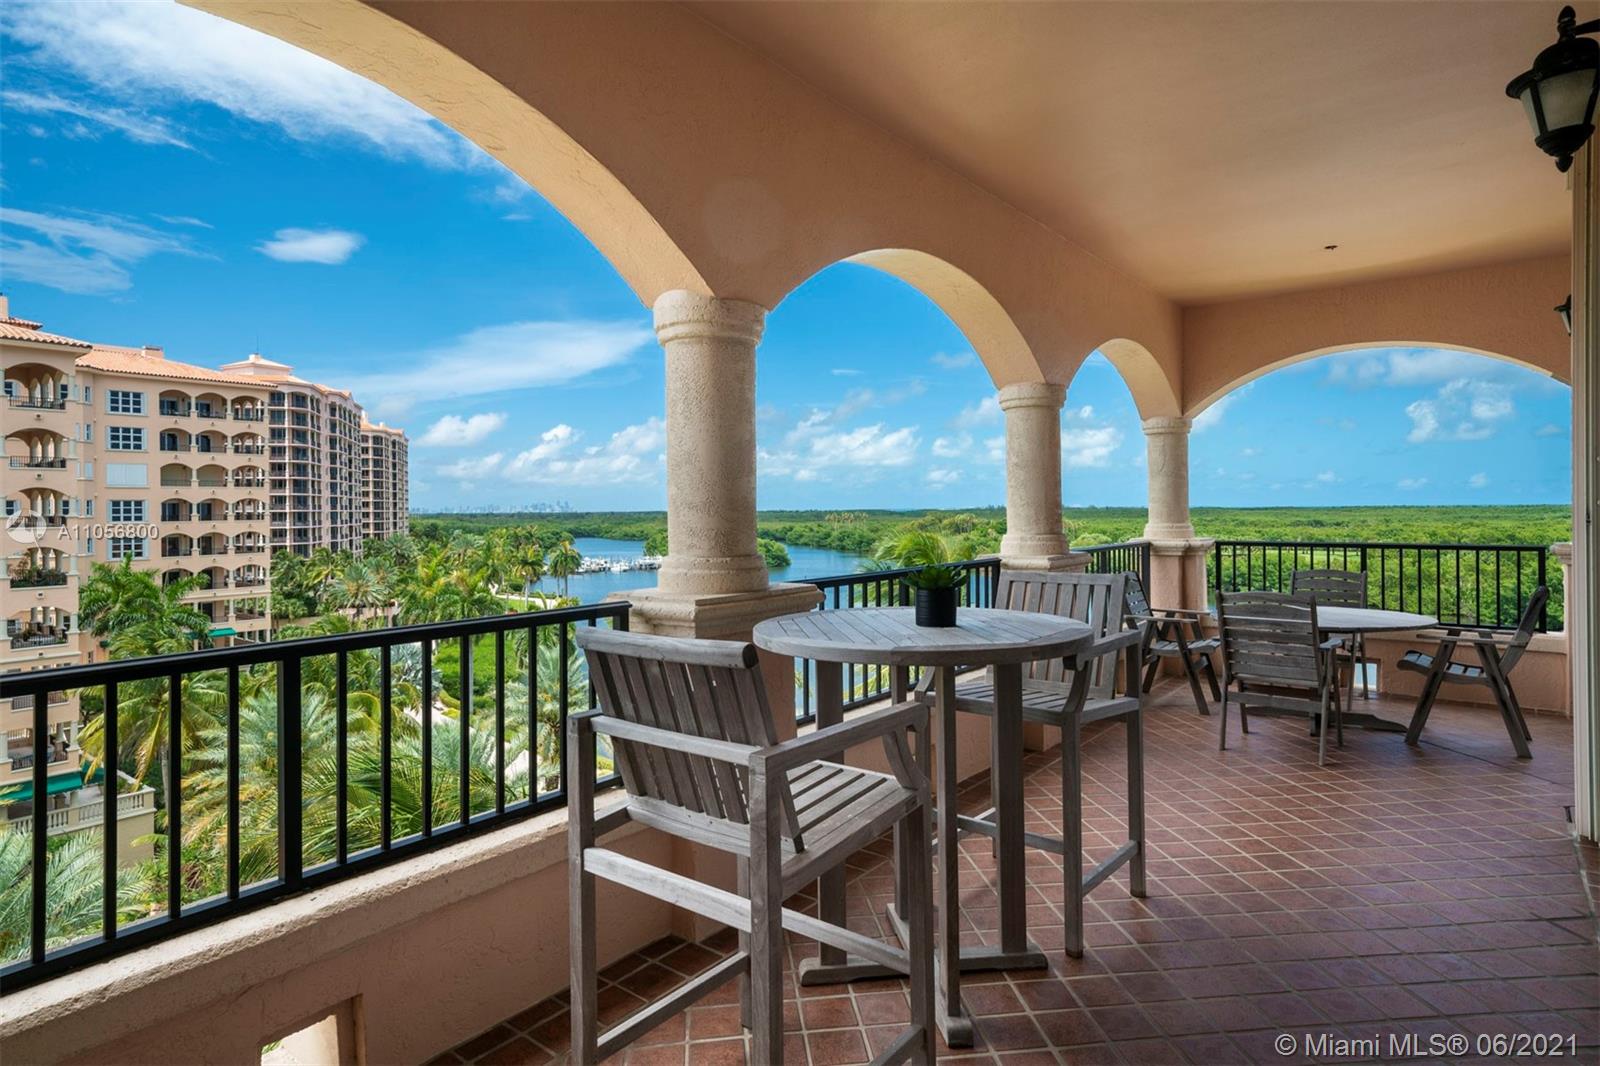 Photo 16 of Deering Bay Condo I Apt 165 in Coral Gables - MLS A11056800